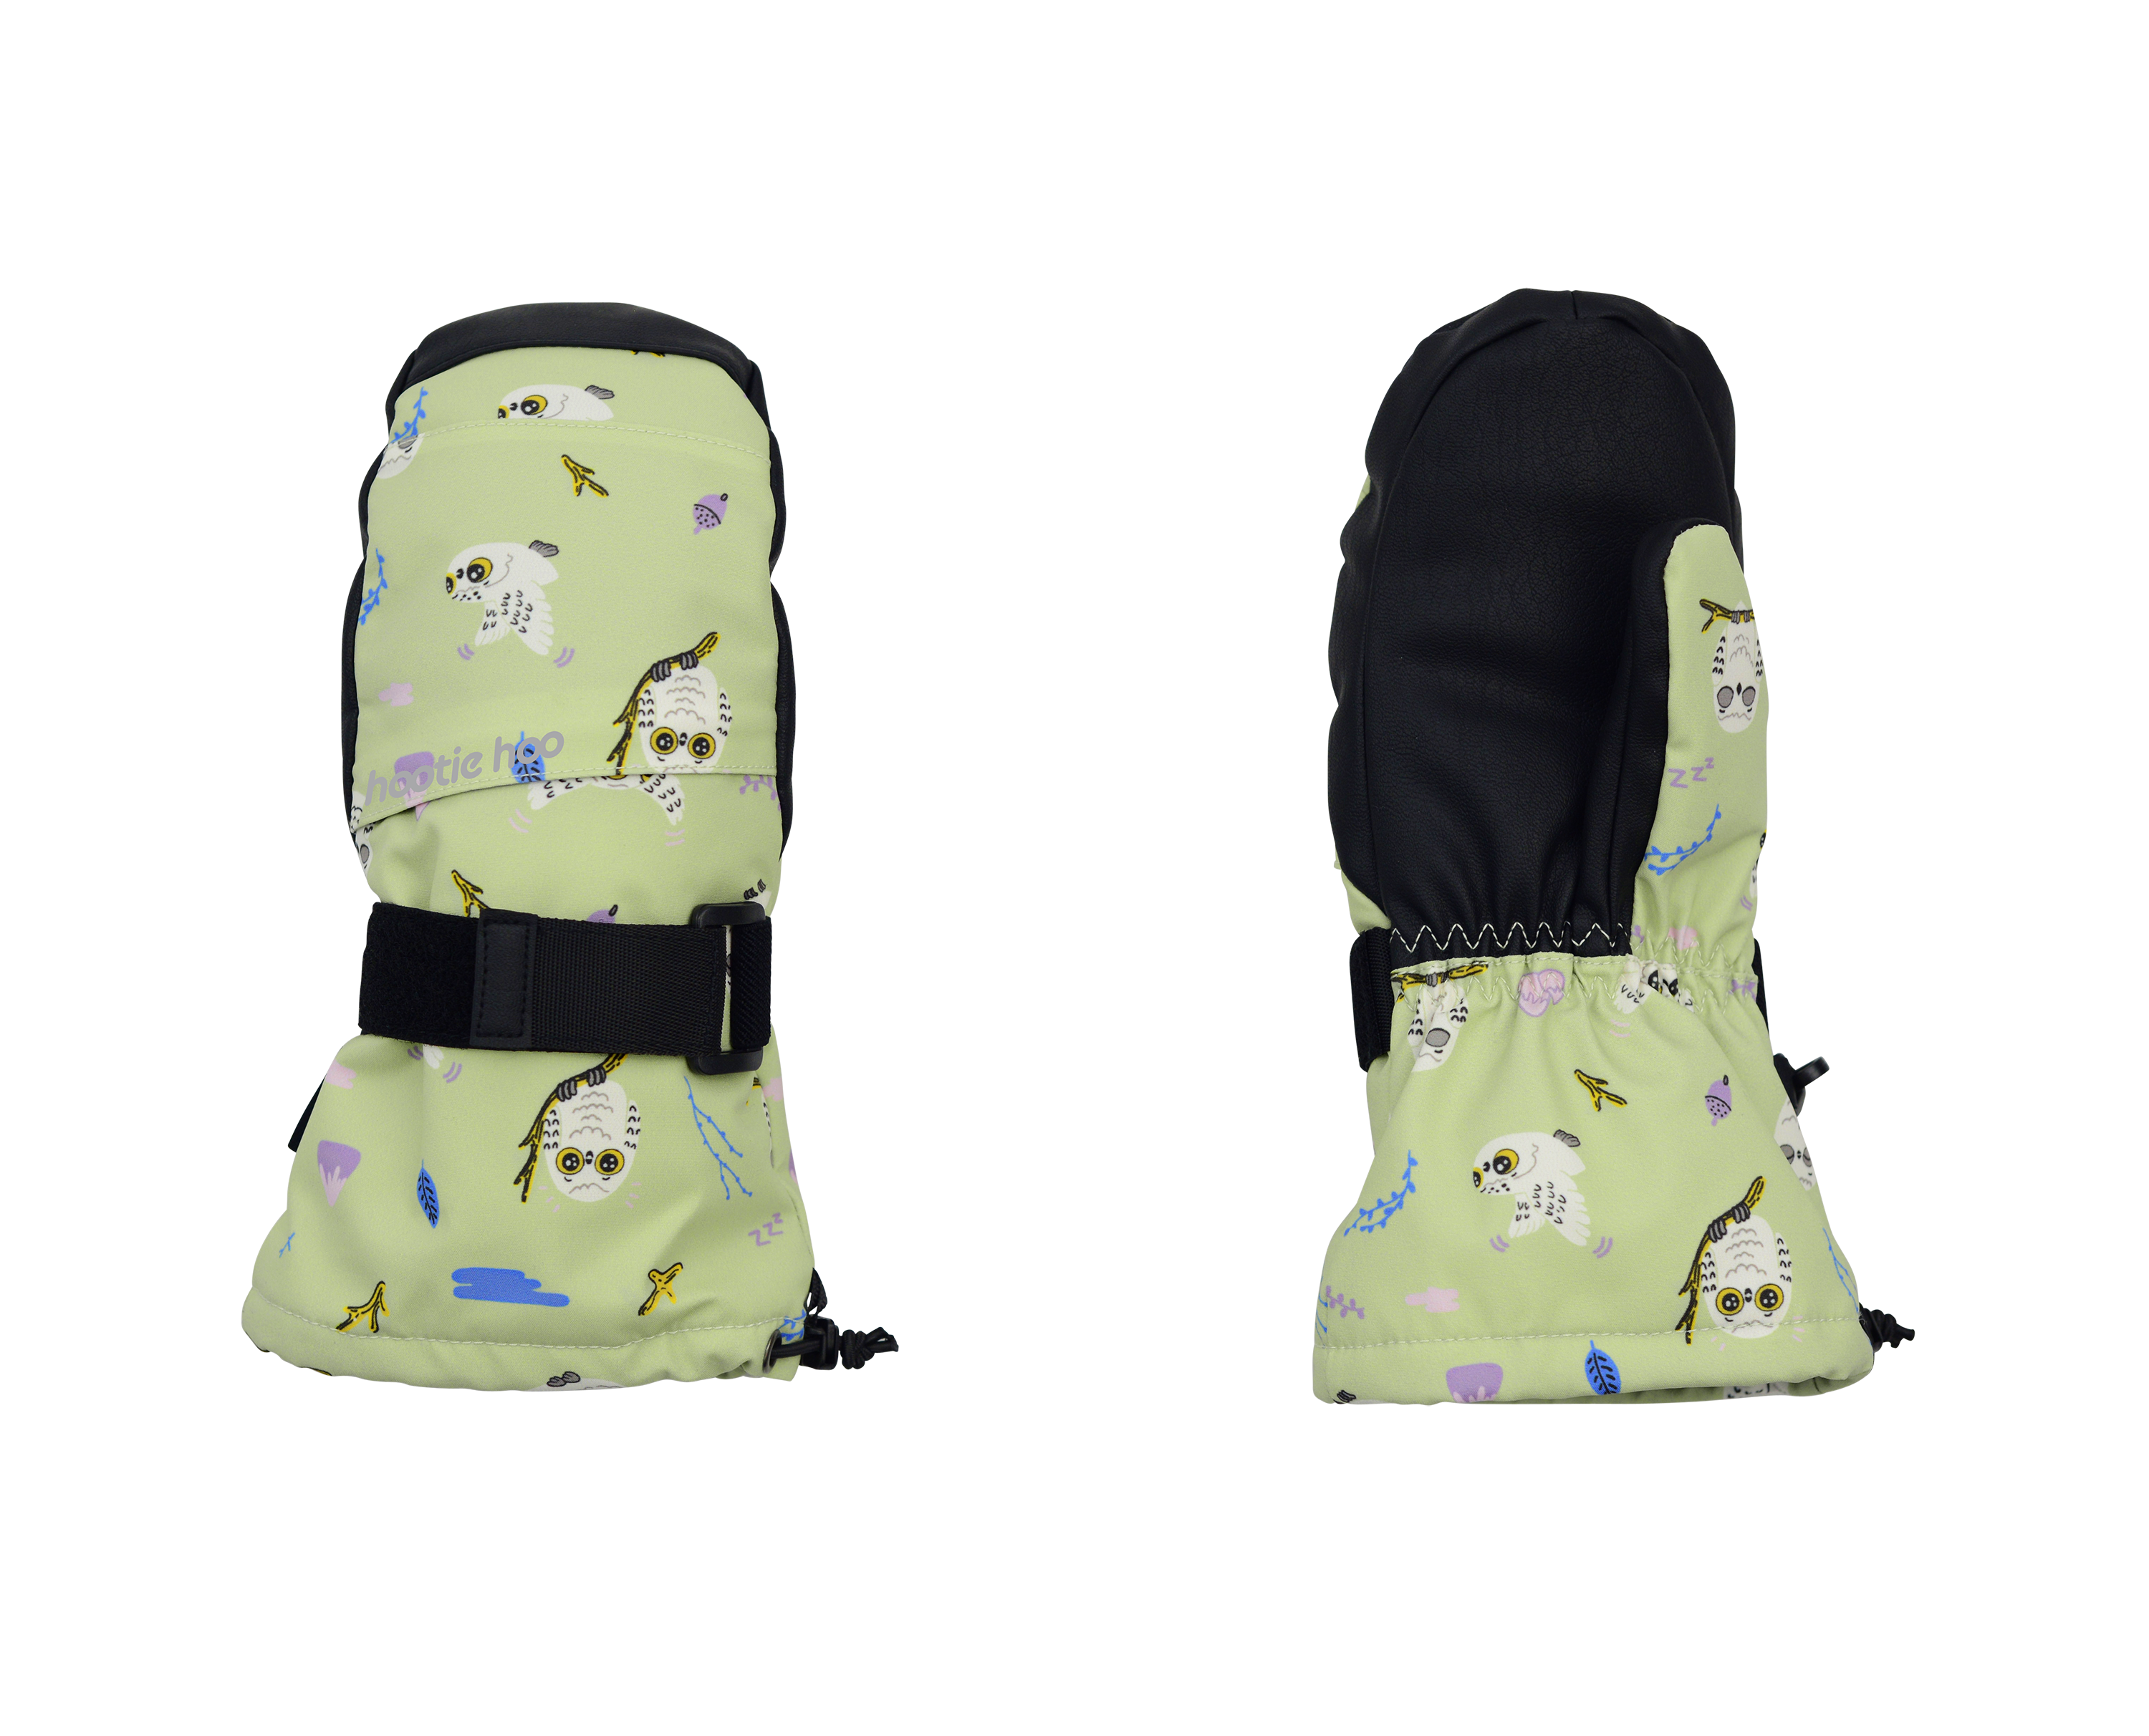 Bearclaw Kids Mittens for Skiing & Snowboarding